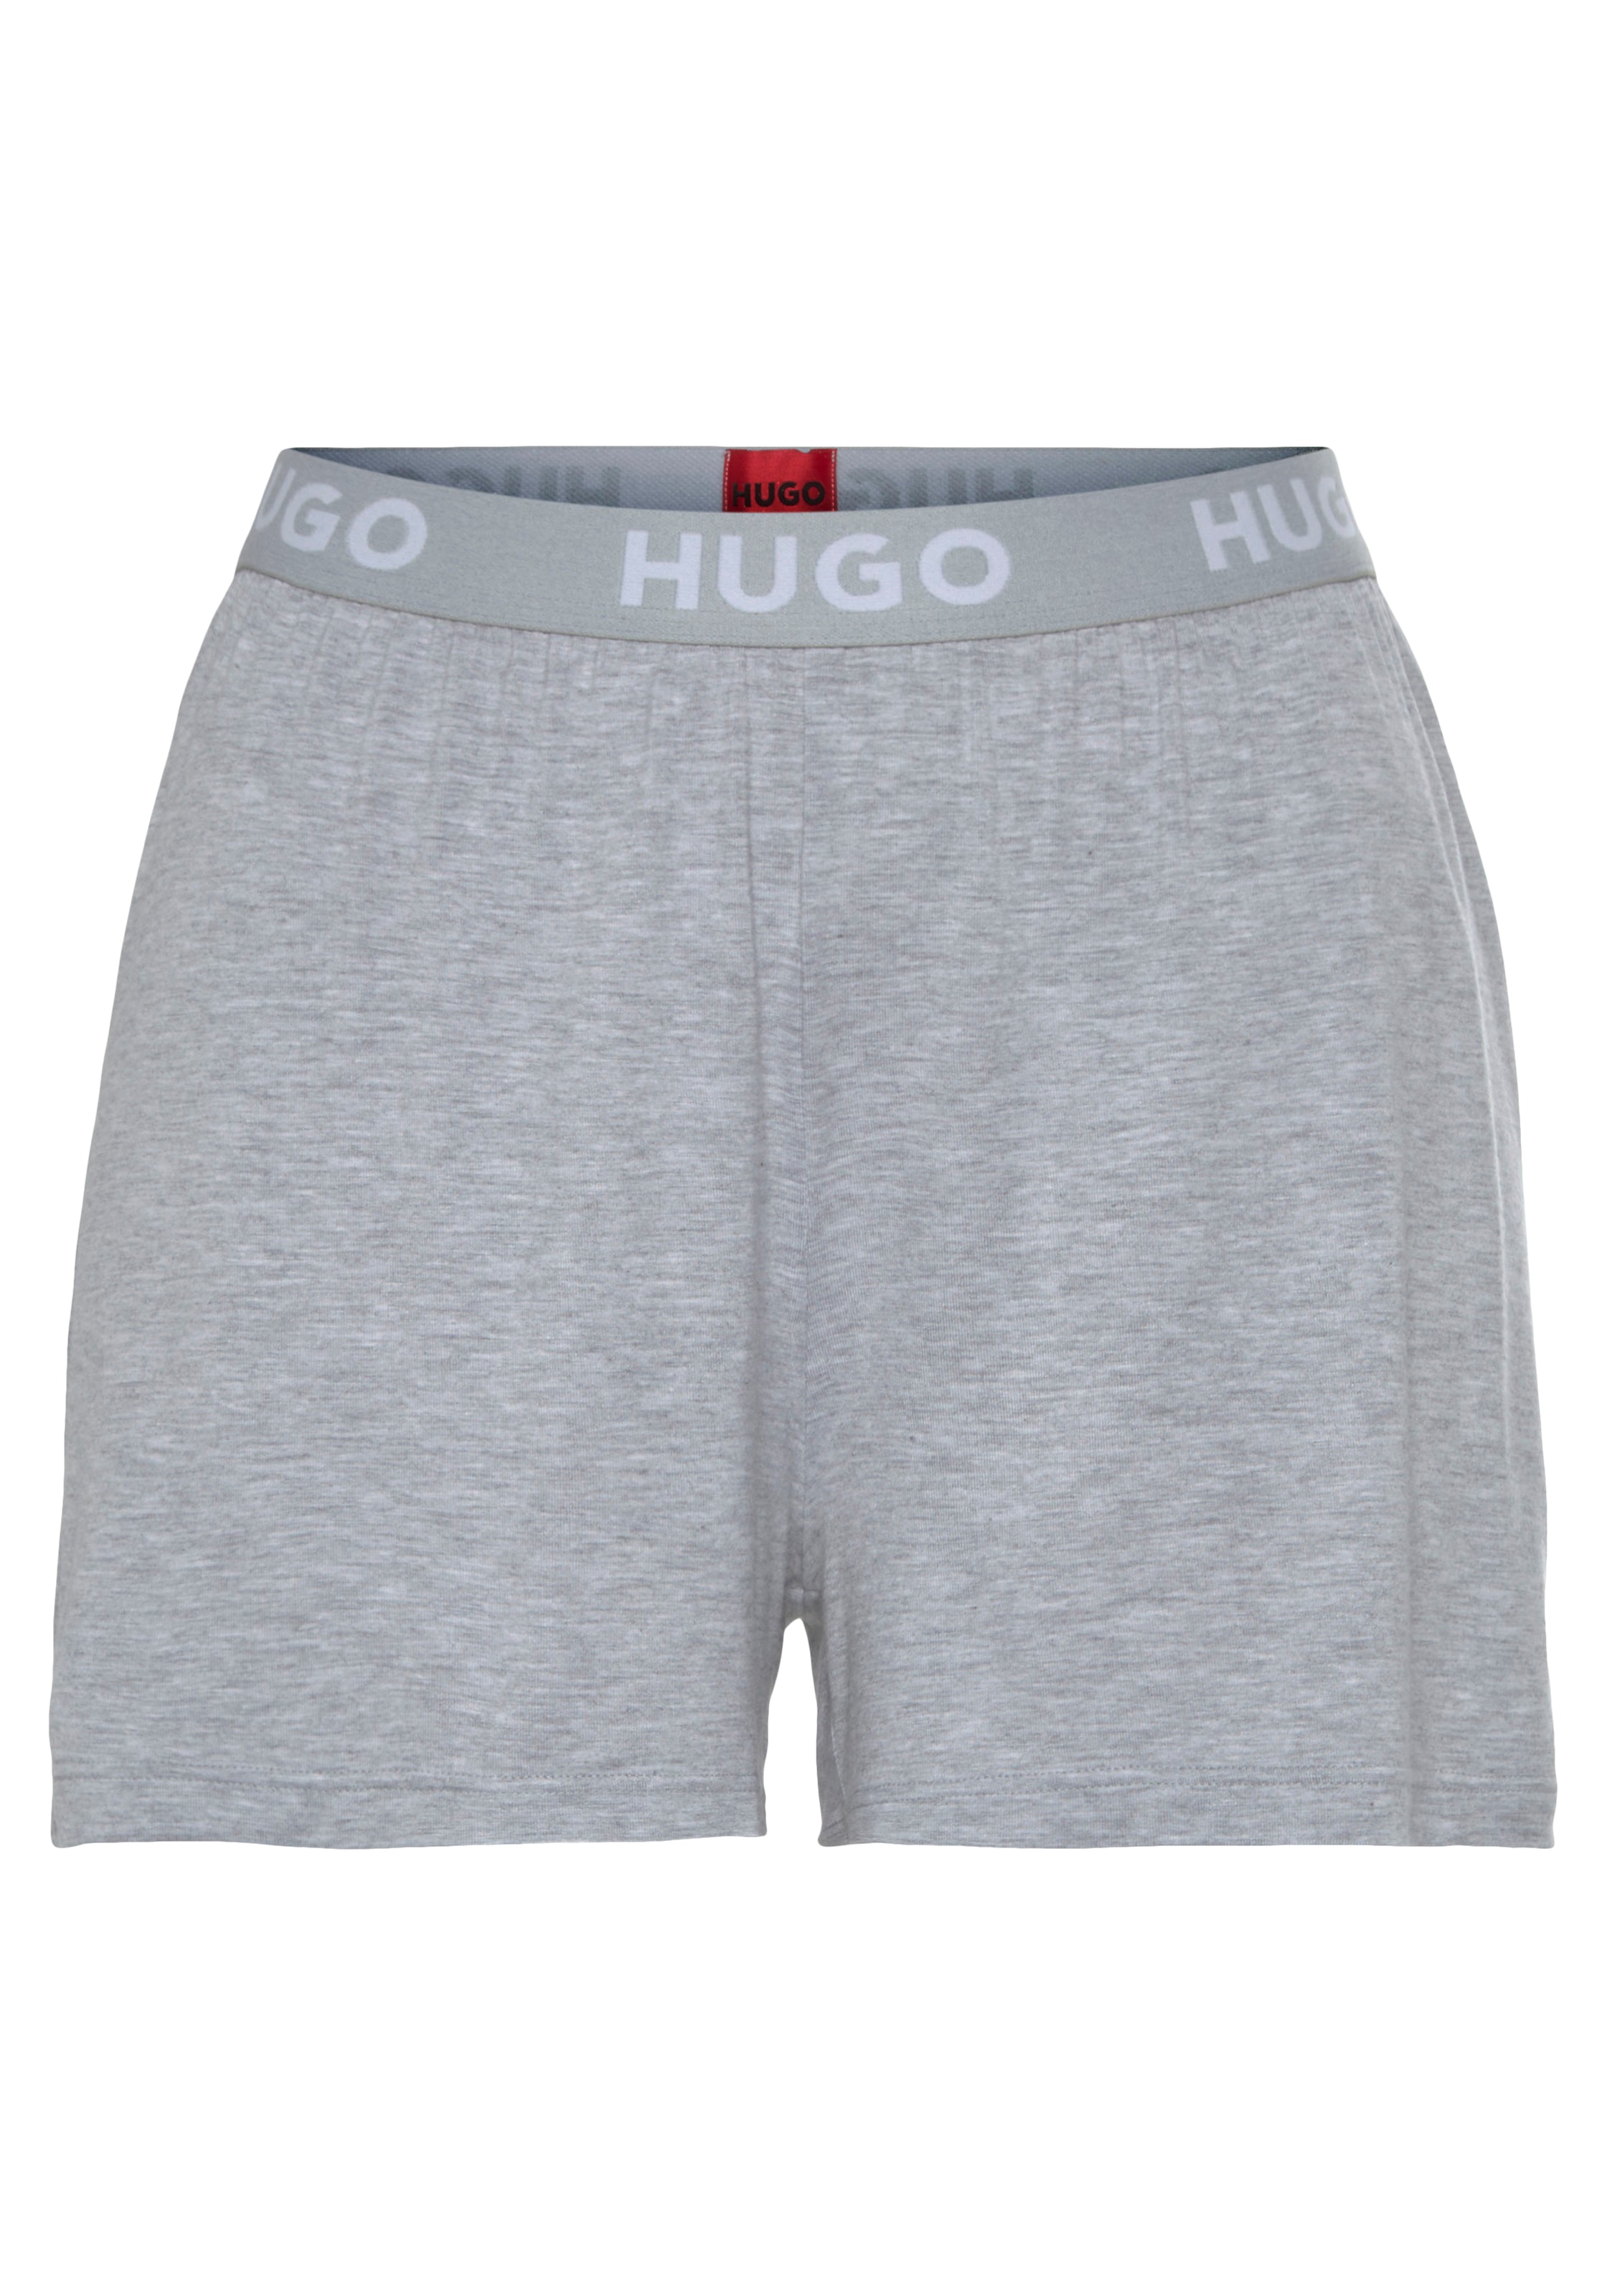 BOSS - Pajama bottoms with embroidered logo